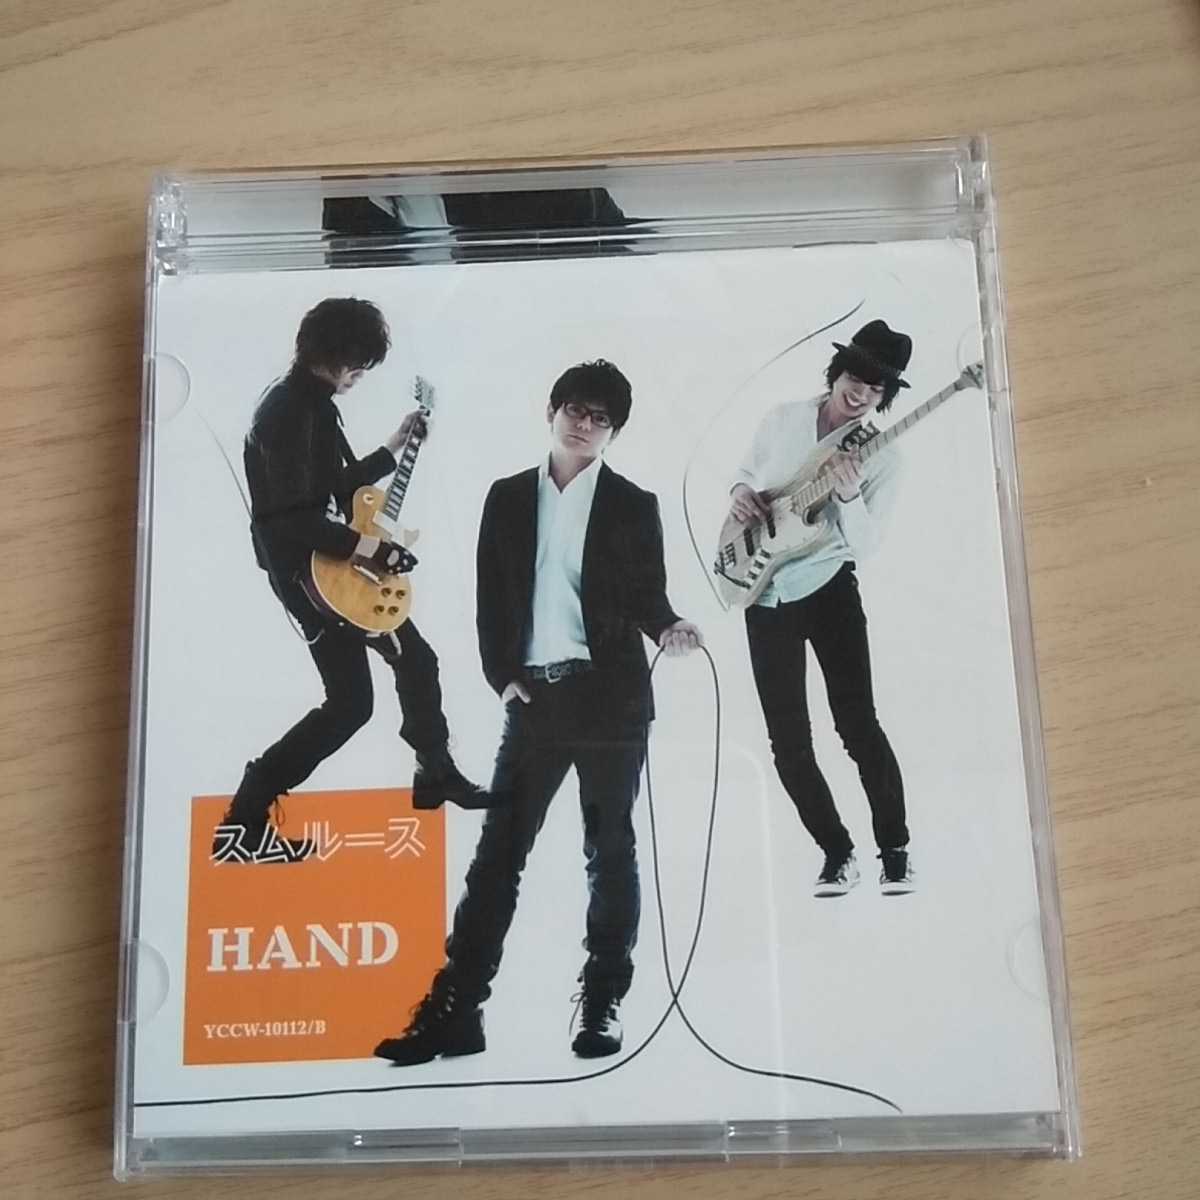 T082　CD＋DVD　スムルース　HAND　CD　１．CLAP YOUR HANDS　２．Beat　３．体感幸福論　４．殺風景_画像1